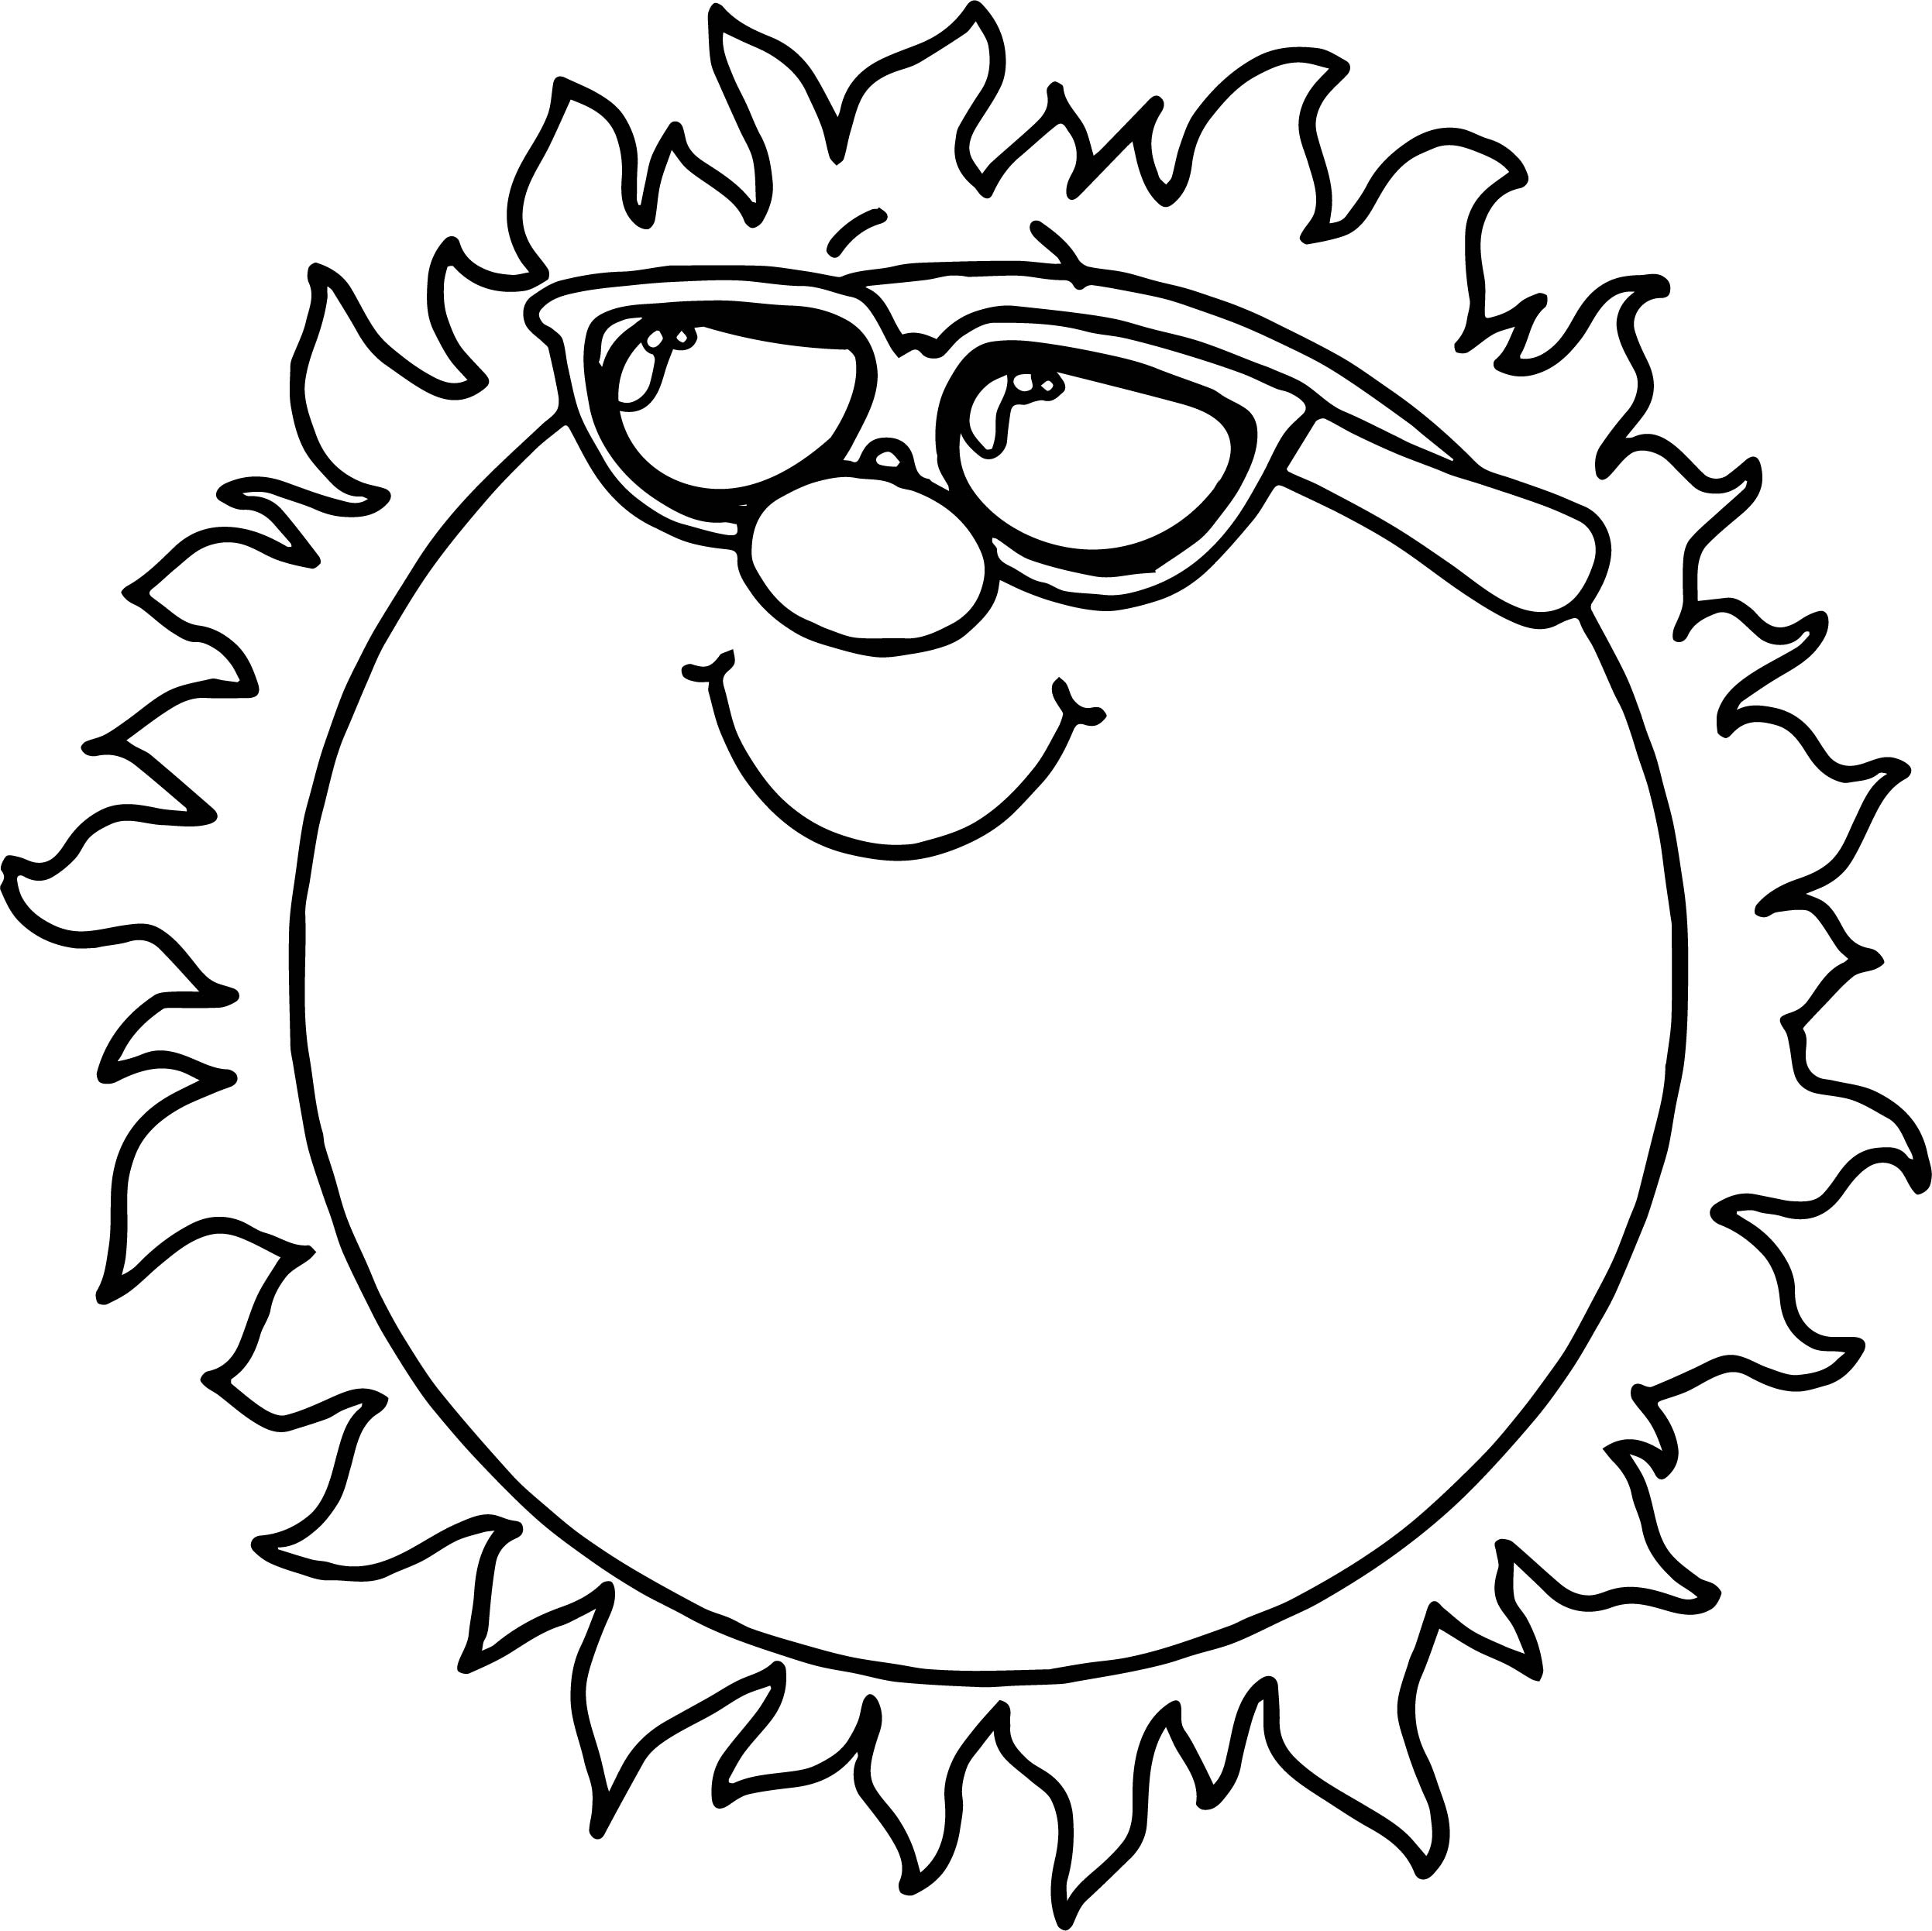 Sunshine Coloring Page at Free printable colorings